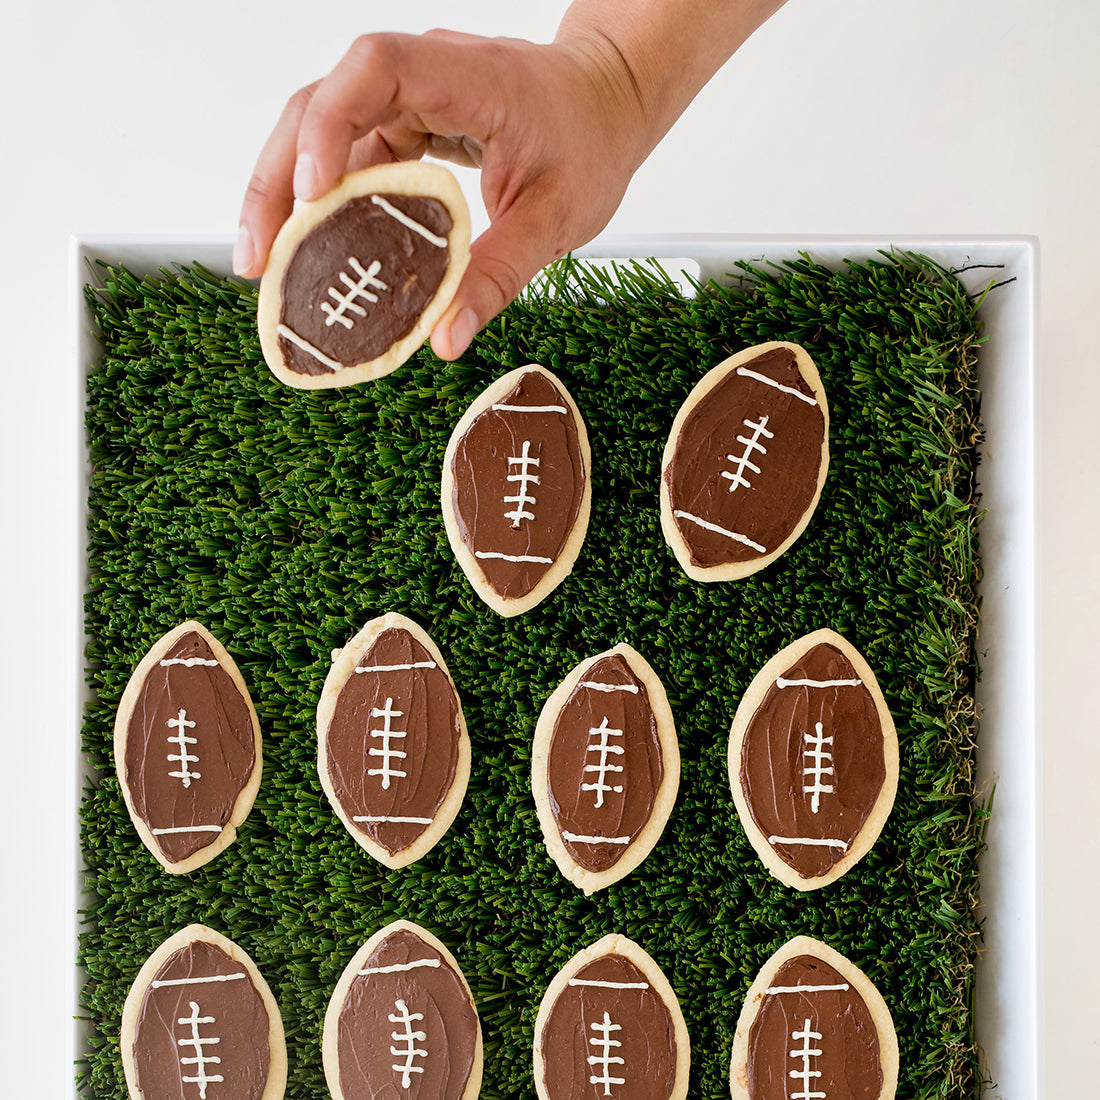 Image from above of eleven Miss Jones Baking Co Soft & Chewy Football Cutout Sugar Cookies on a turf mat